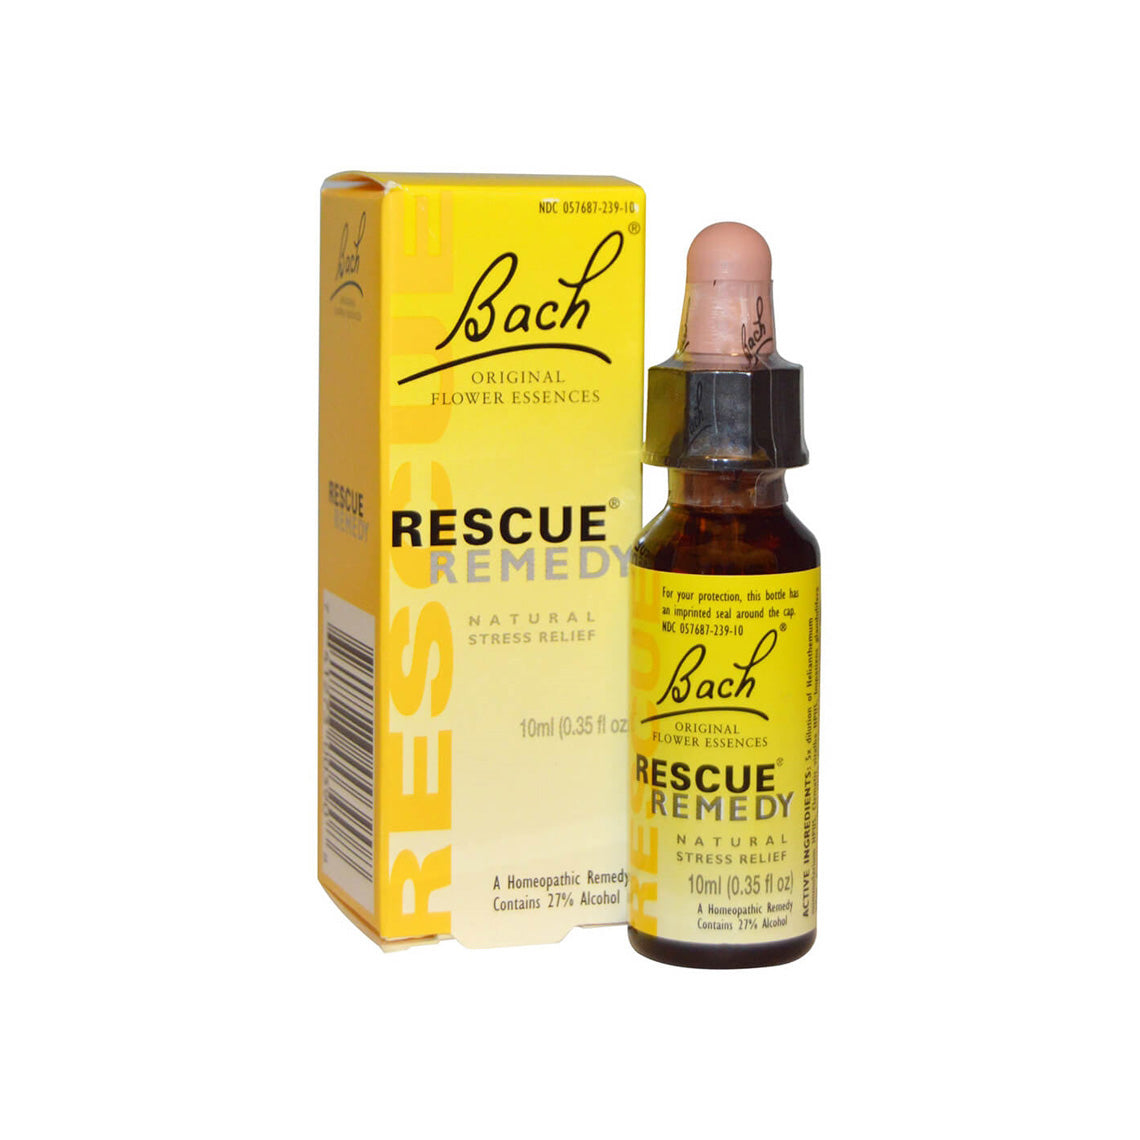 rescue remedy cats dosage